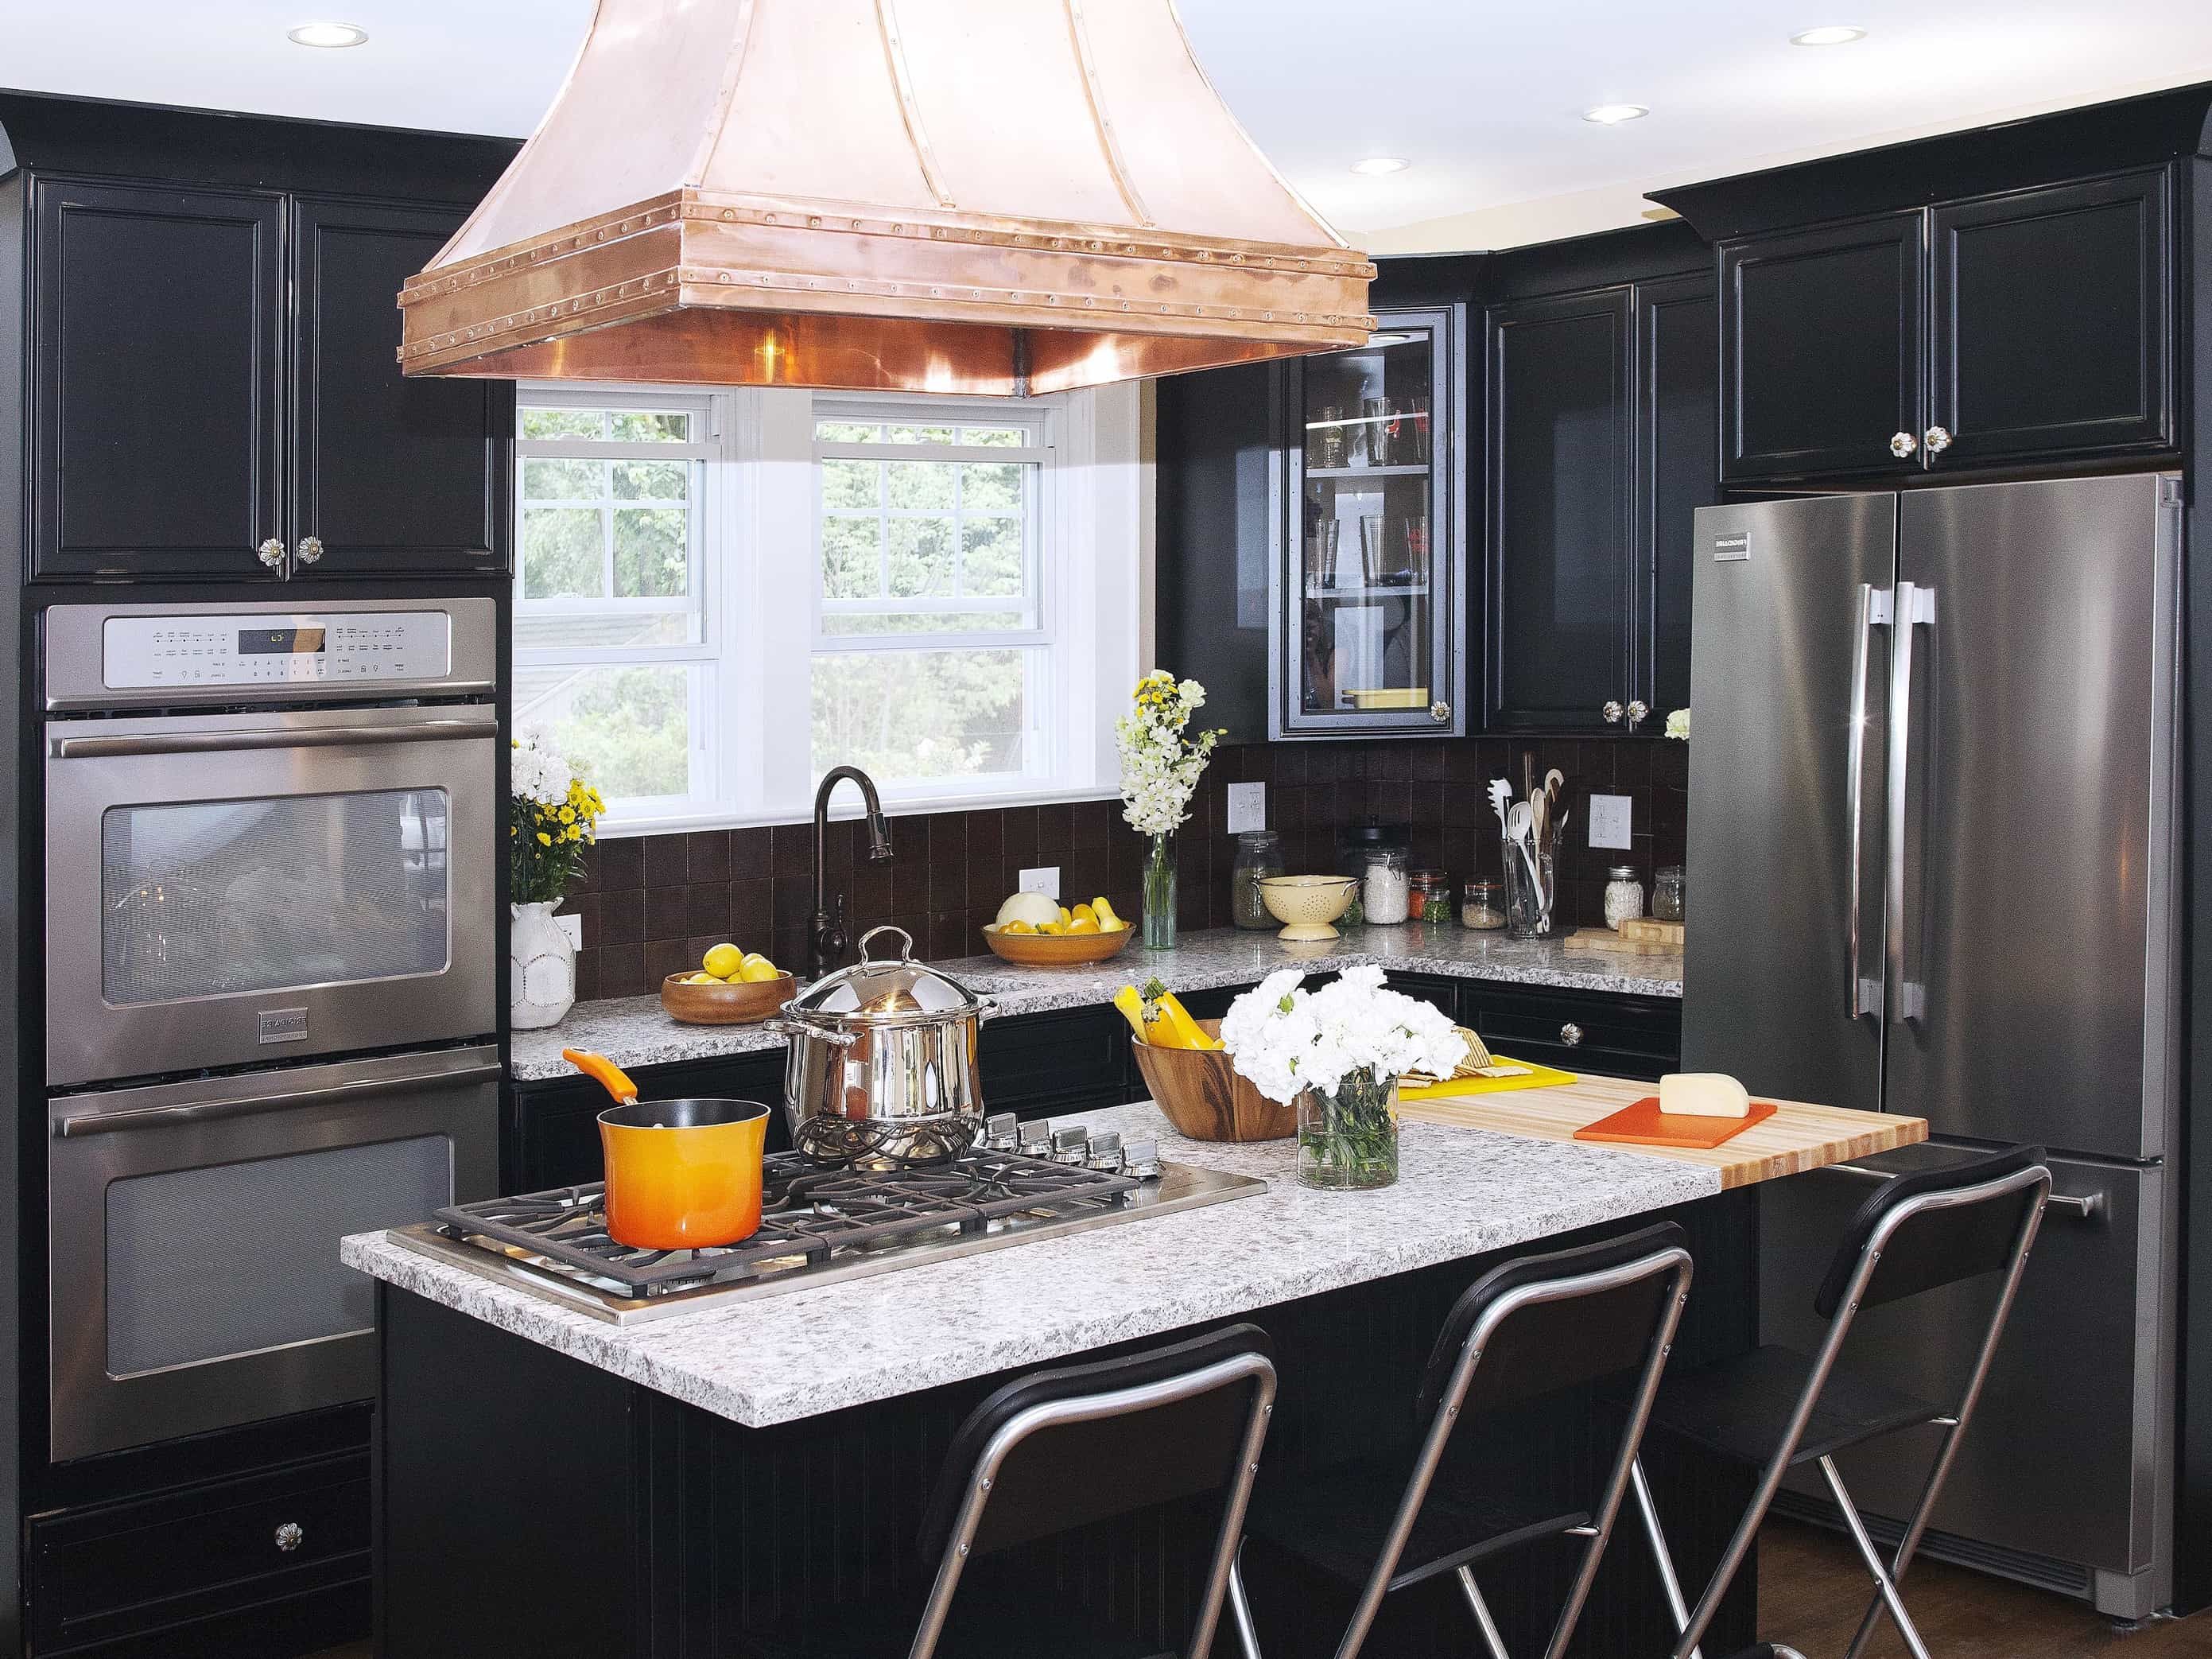 Featured Photo of Colonial Kitchen With Copper Range Hood and Black Cabinets